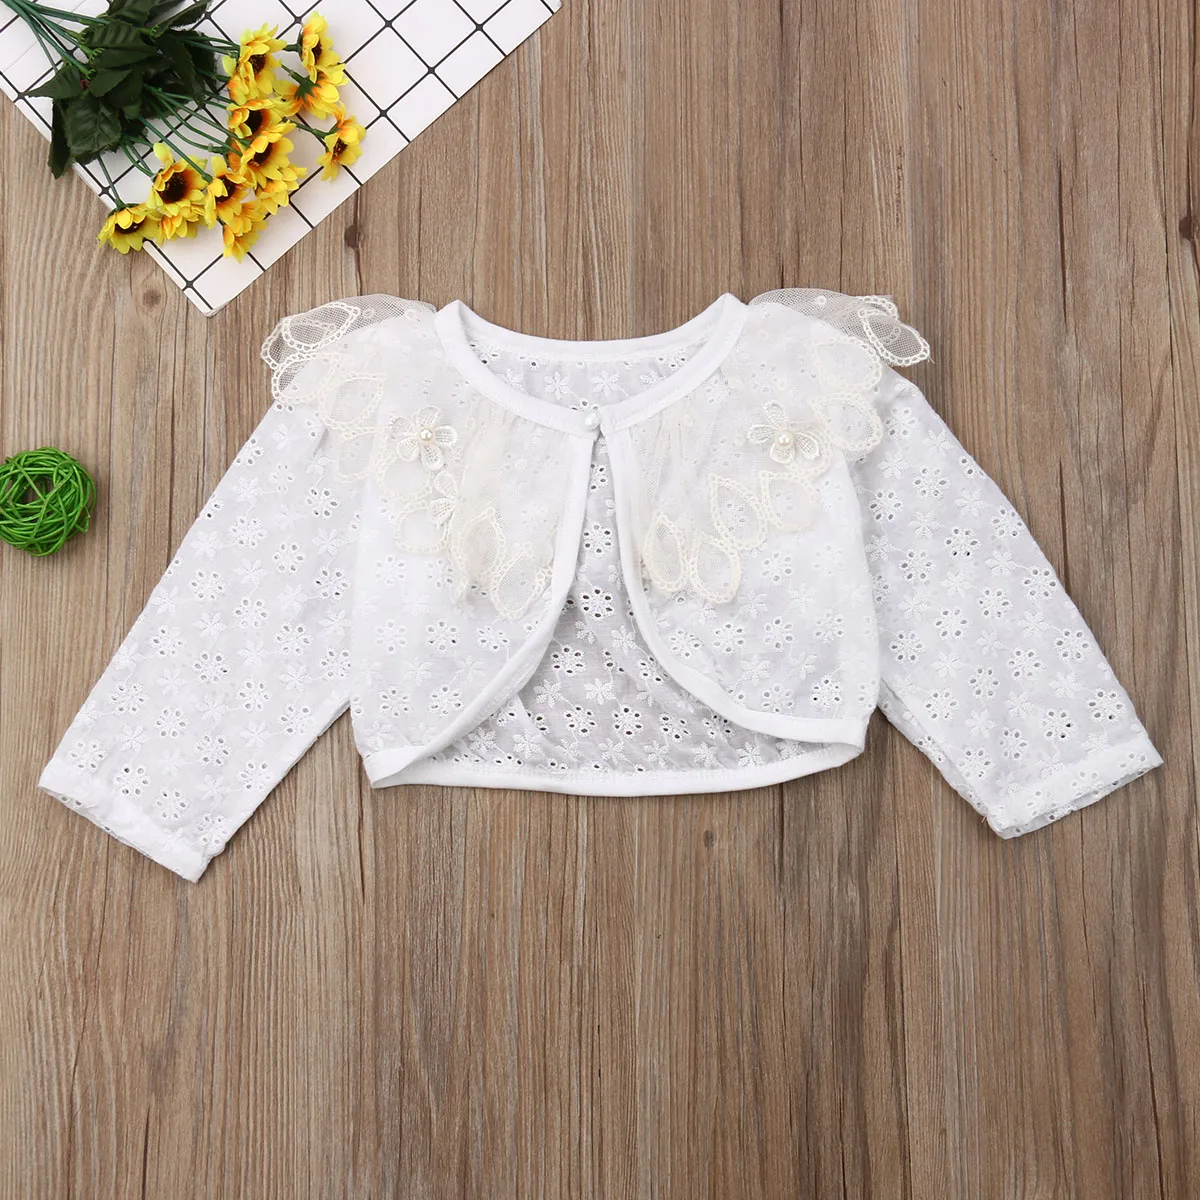 1-5T Cute Kid Girls Lace Hollow-out Long Sleeve Cardigan Coats Kids Baby Girls Floral Cardigan Tops Jacket Coats White